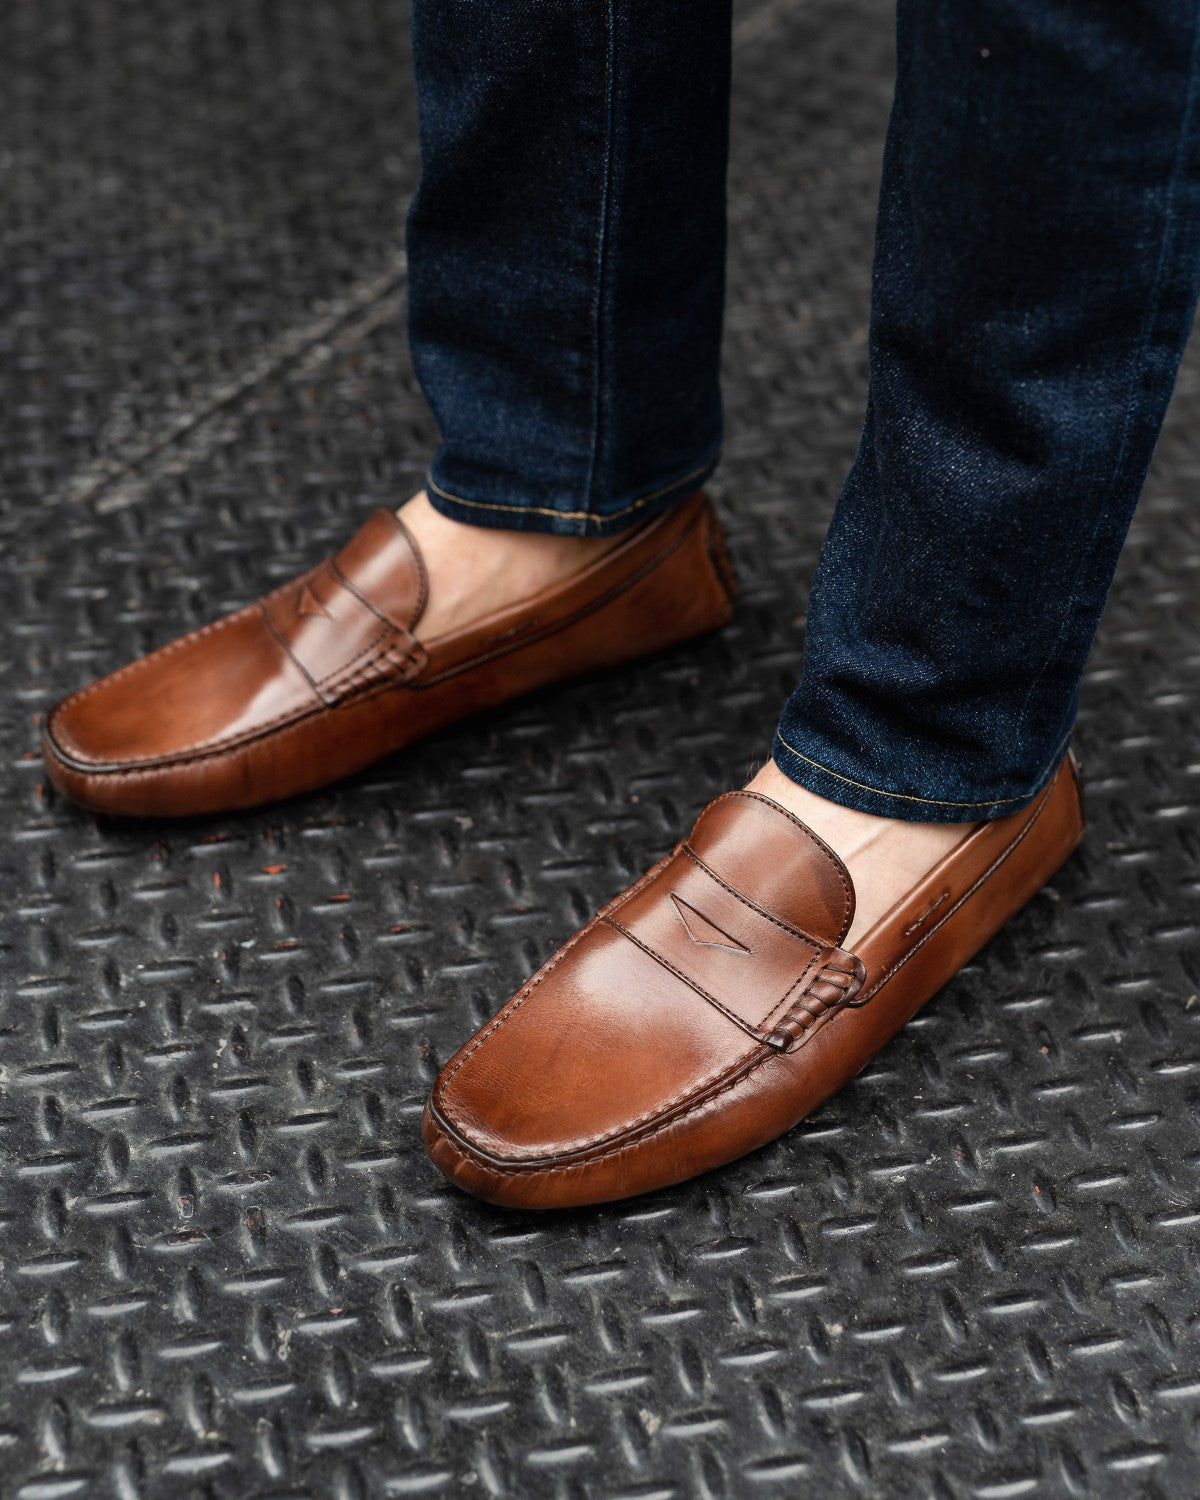 The McQueen Driving Loafer